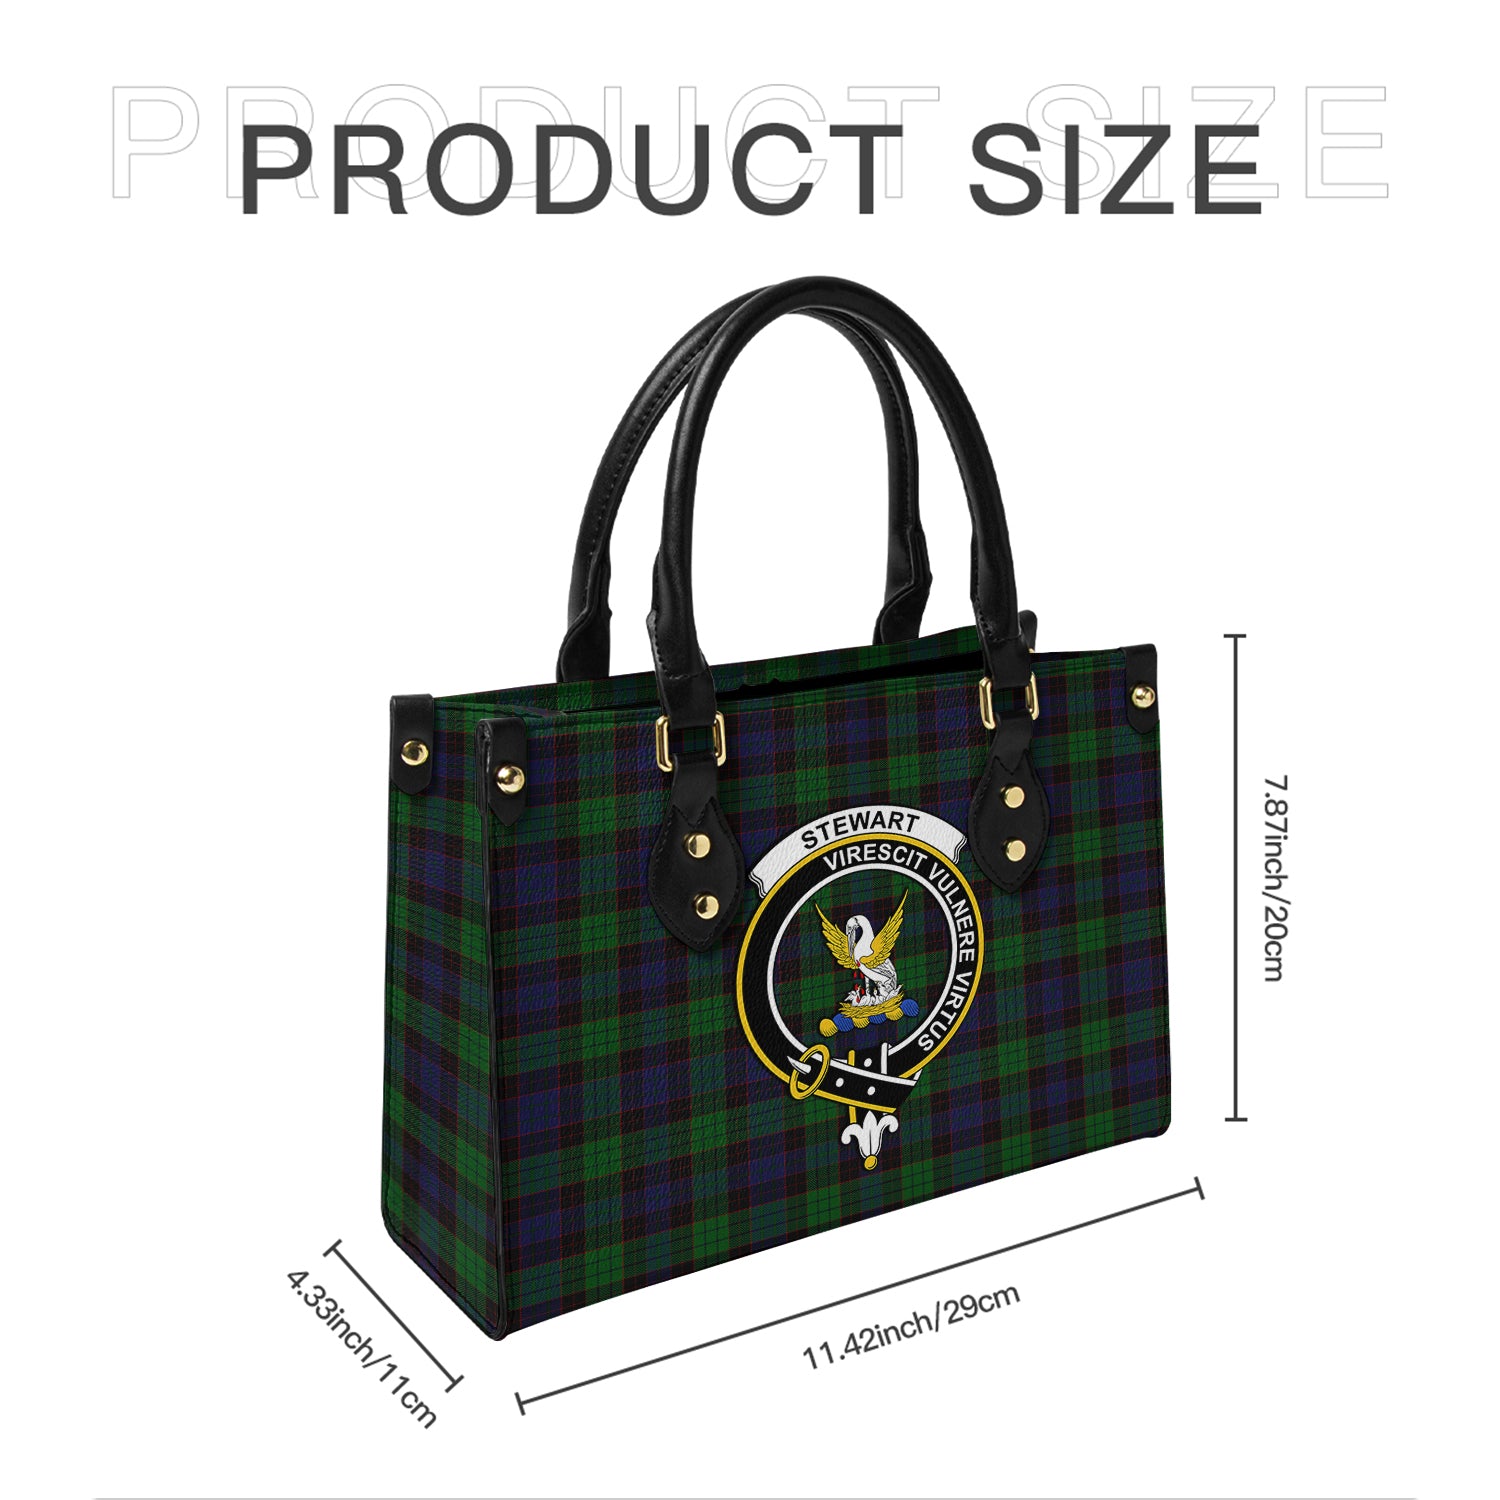 stewart-old-tartan-leather-bag-with-family-crest